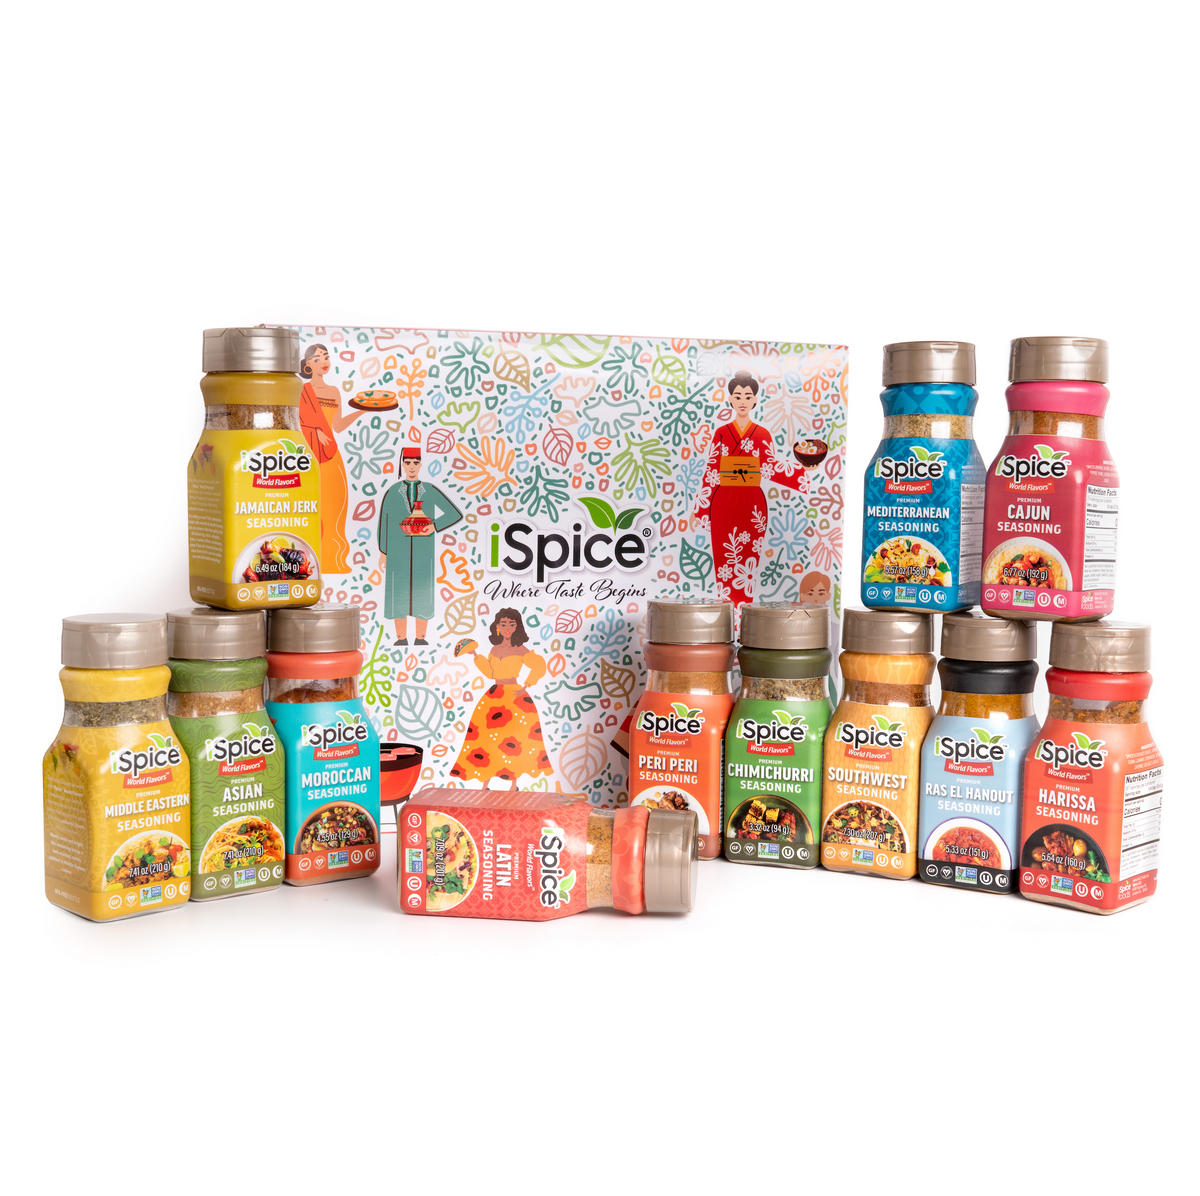 Discounted spices and seasonings for ethnic dishes